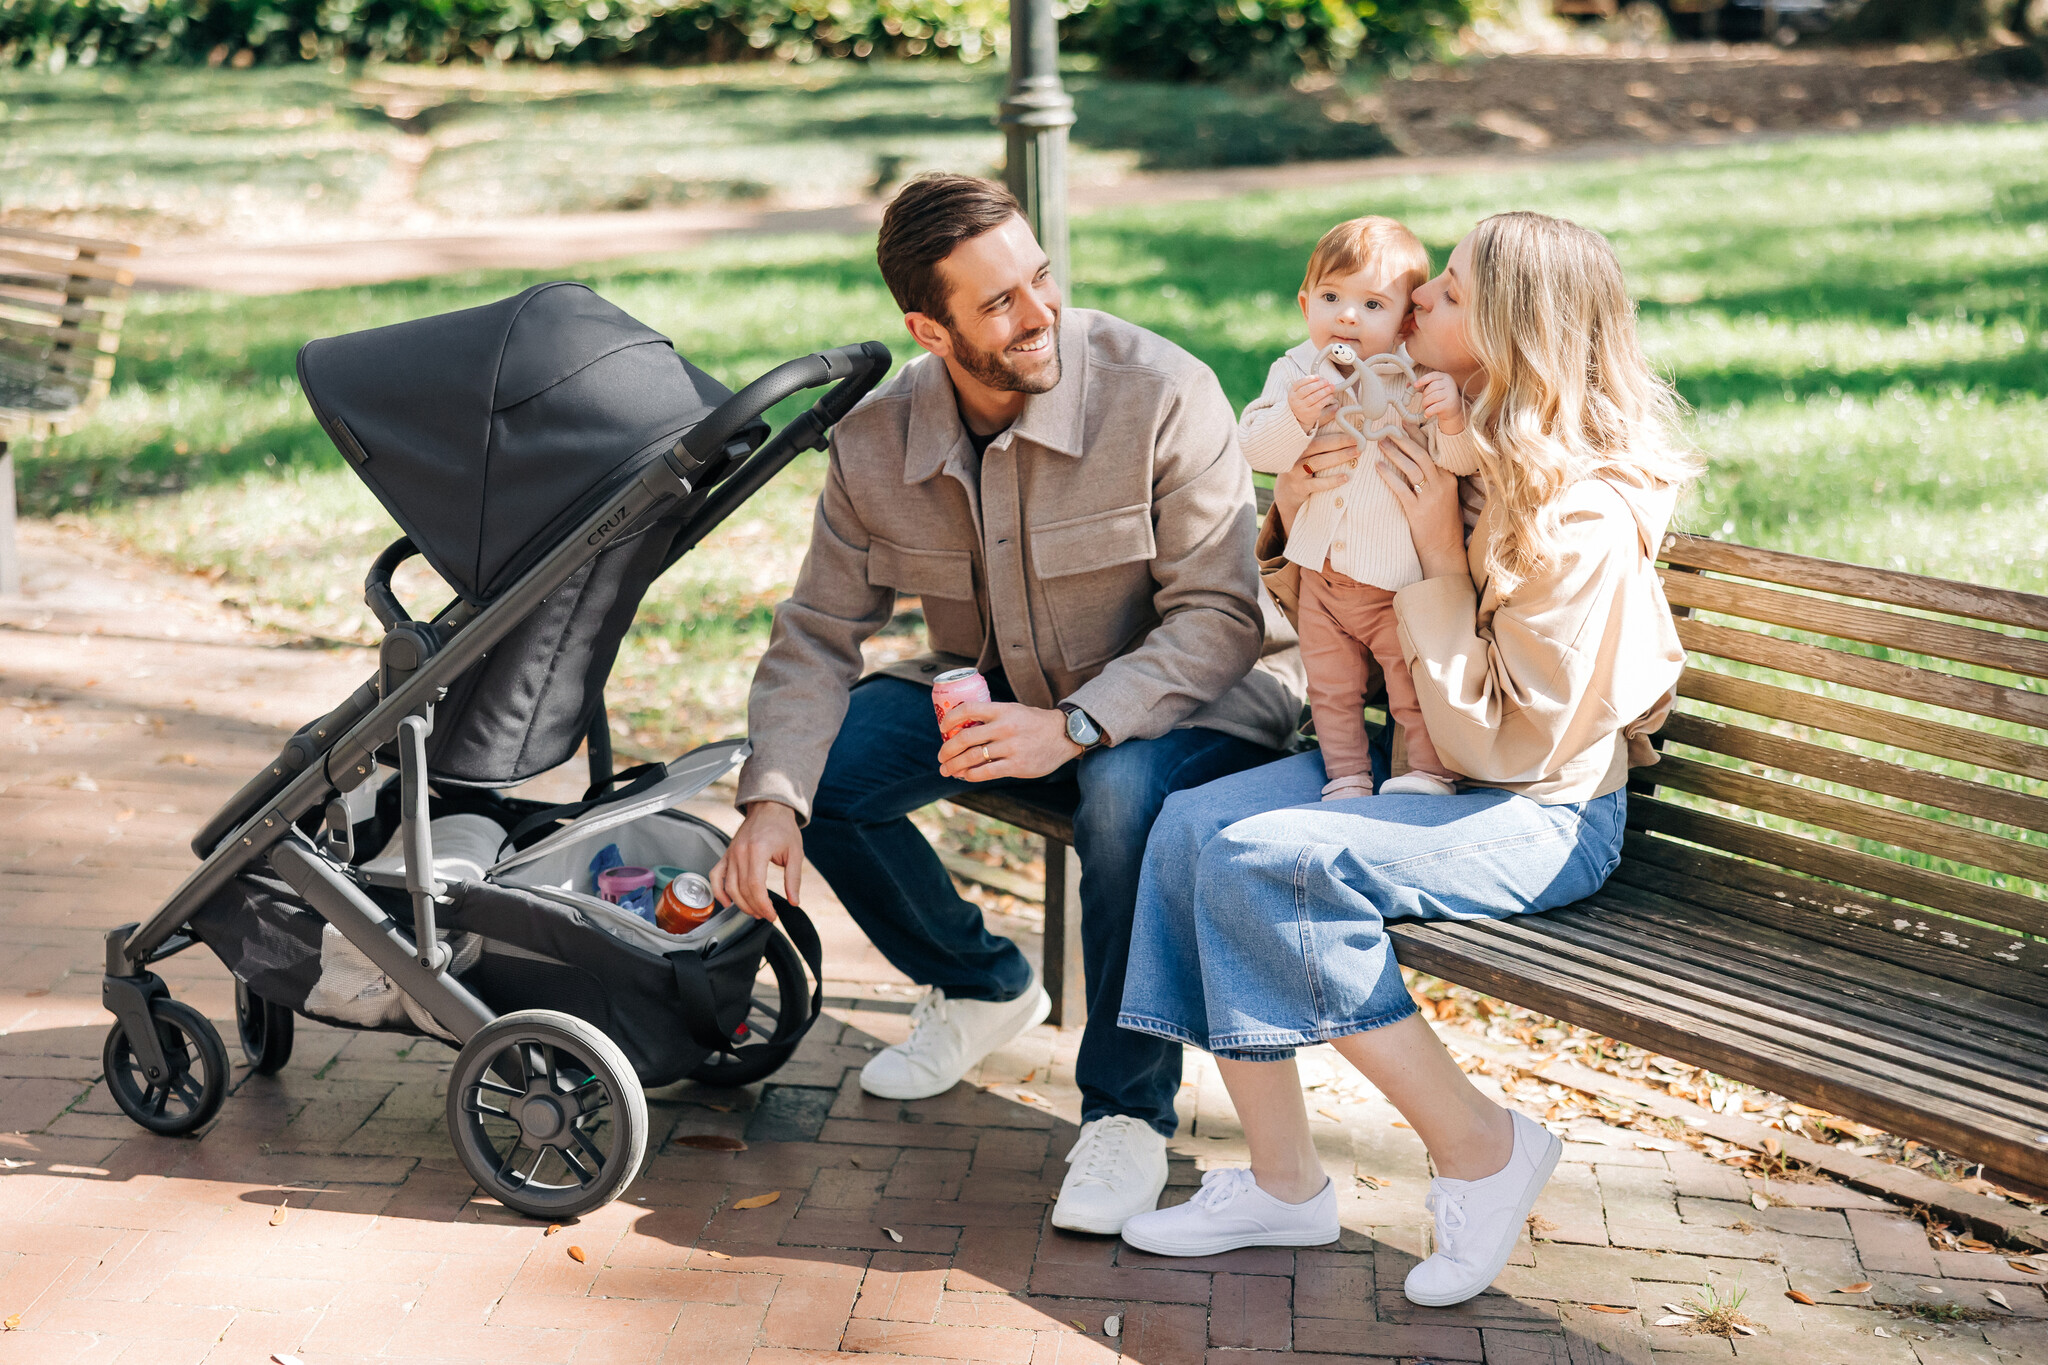 UPPAbaby UPPAbaby Bevvy Carriage Cooler